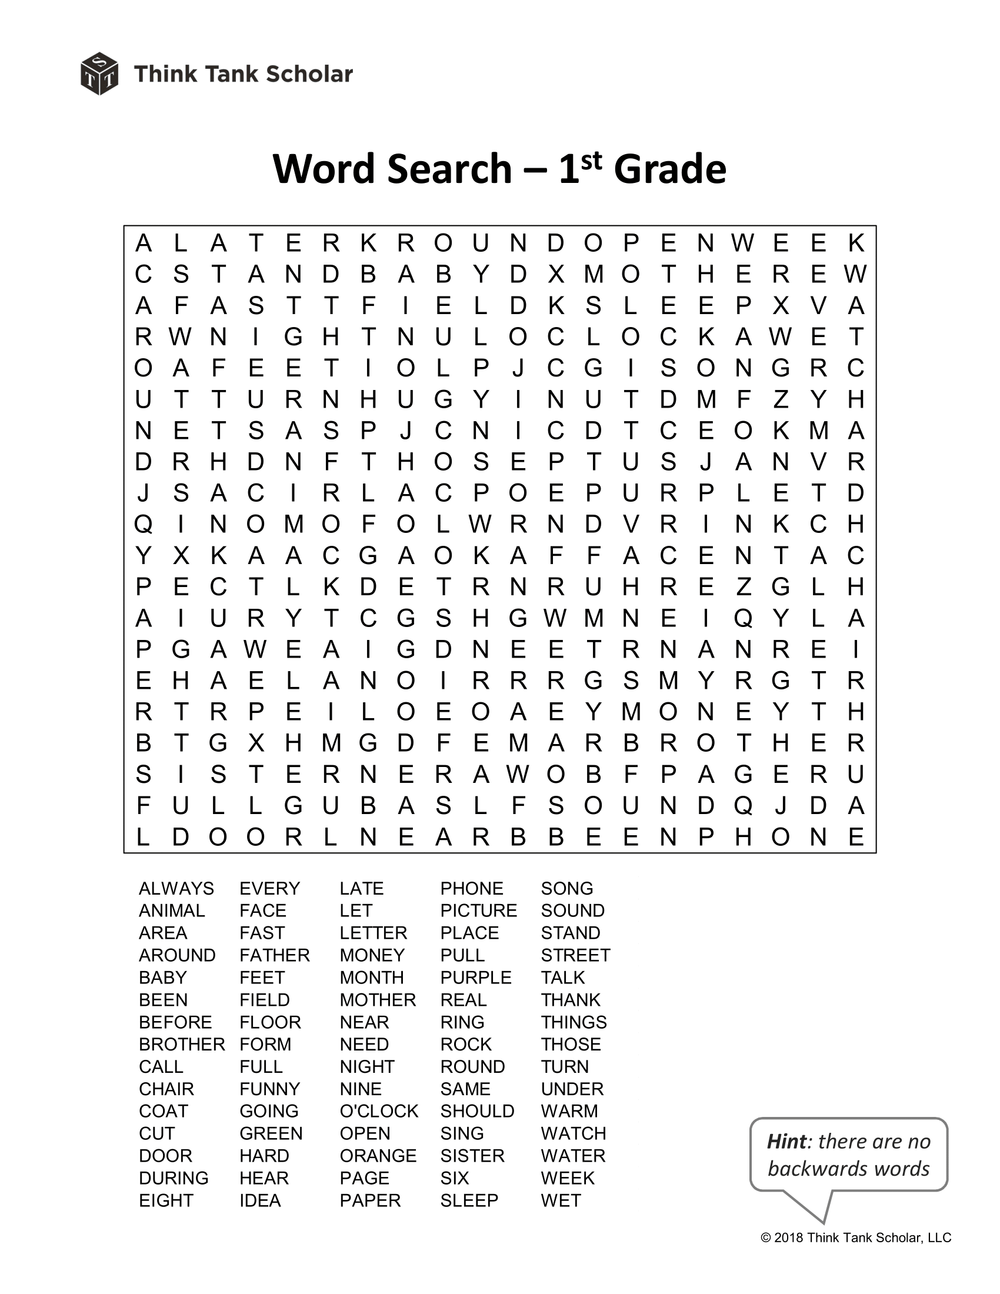 Sight Words Worksheet (FREE): Word Search 1st Grade Printable